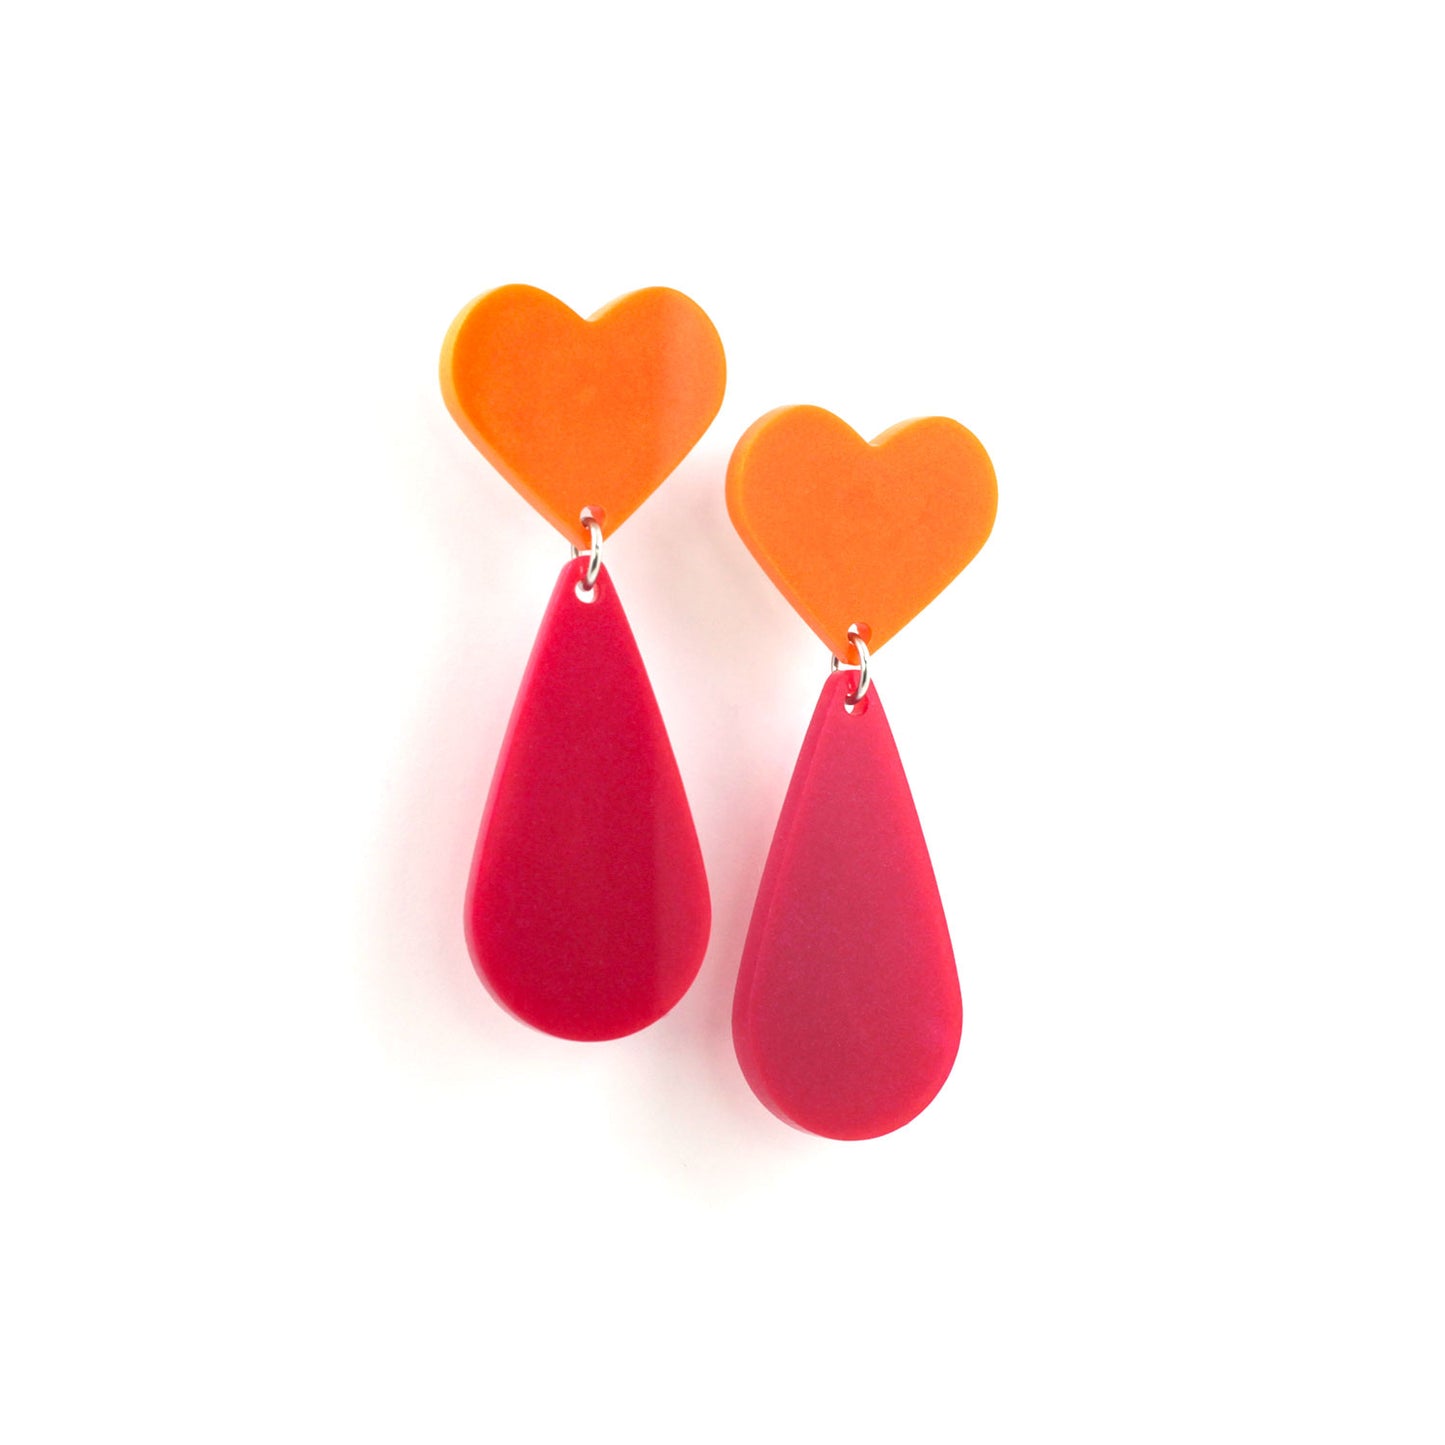 This is a picture of dangles earrings on a white background. The top of the earrings are orange heart and the pendants are pink teardrop. 